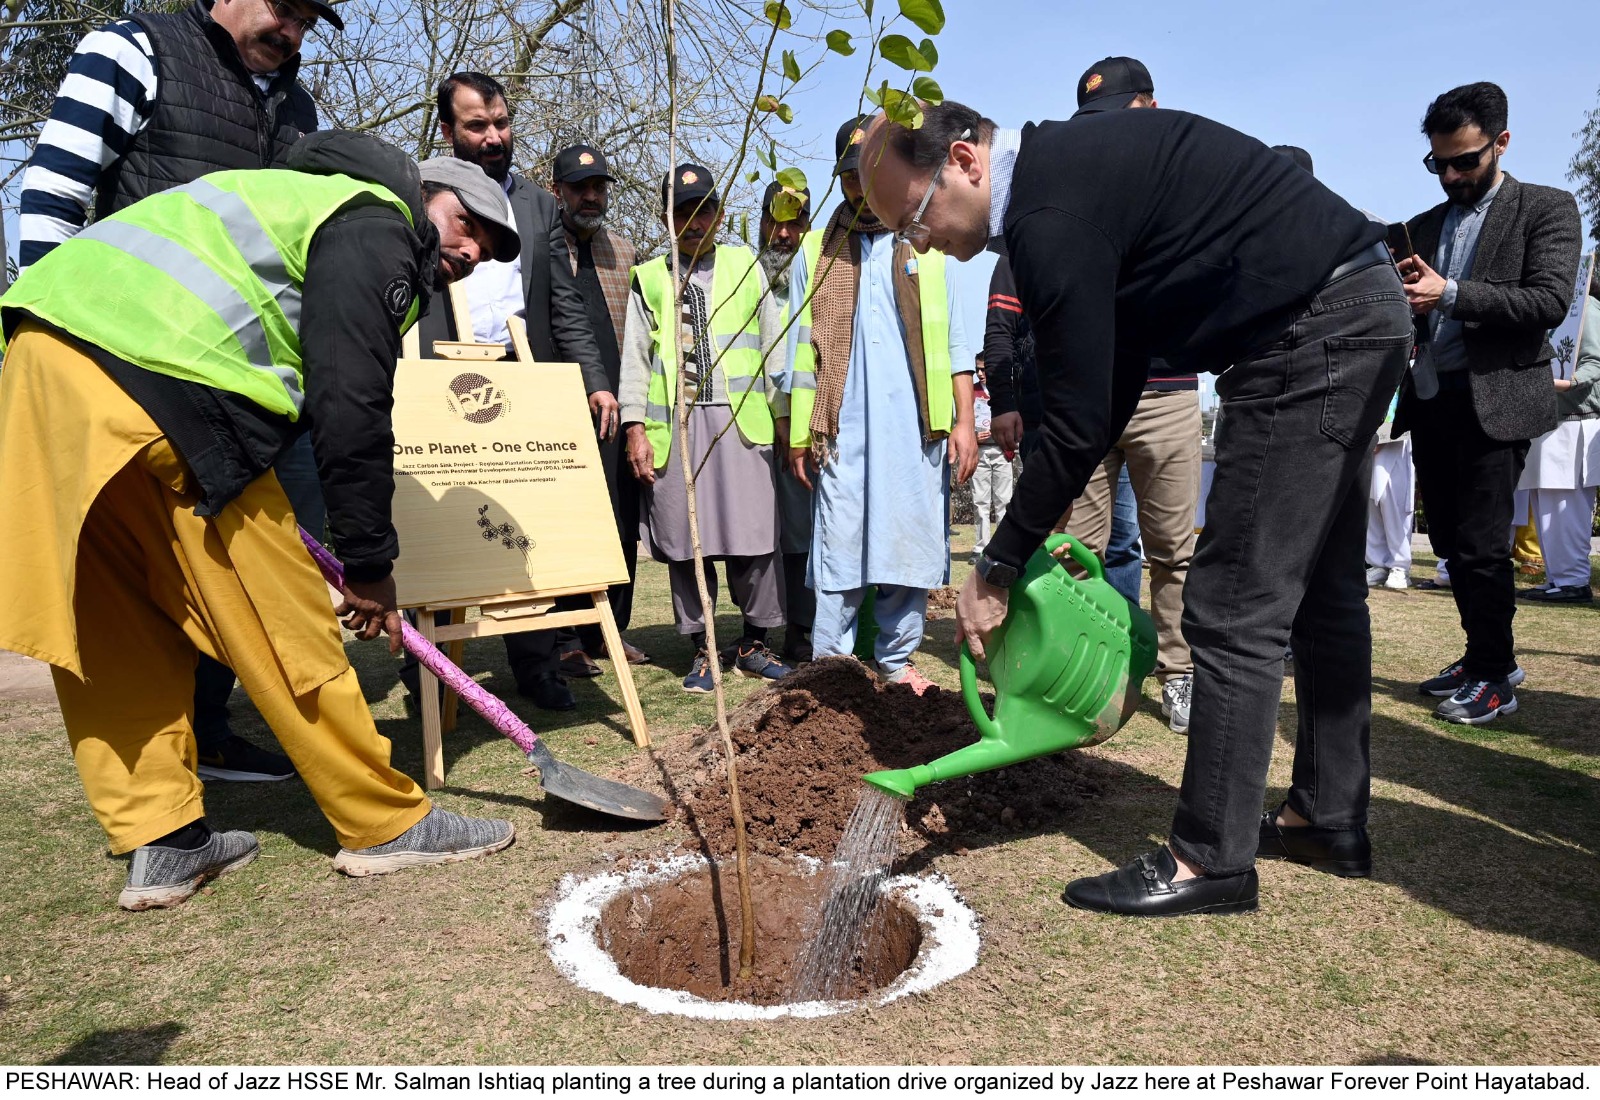 Jazz Holds Tree Plantation Drive in Peshawar as Part of its Carbon Sink Project